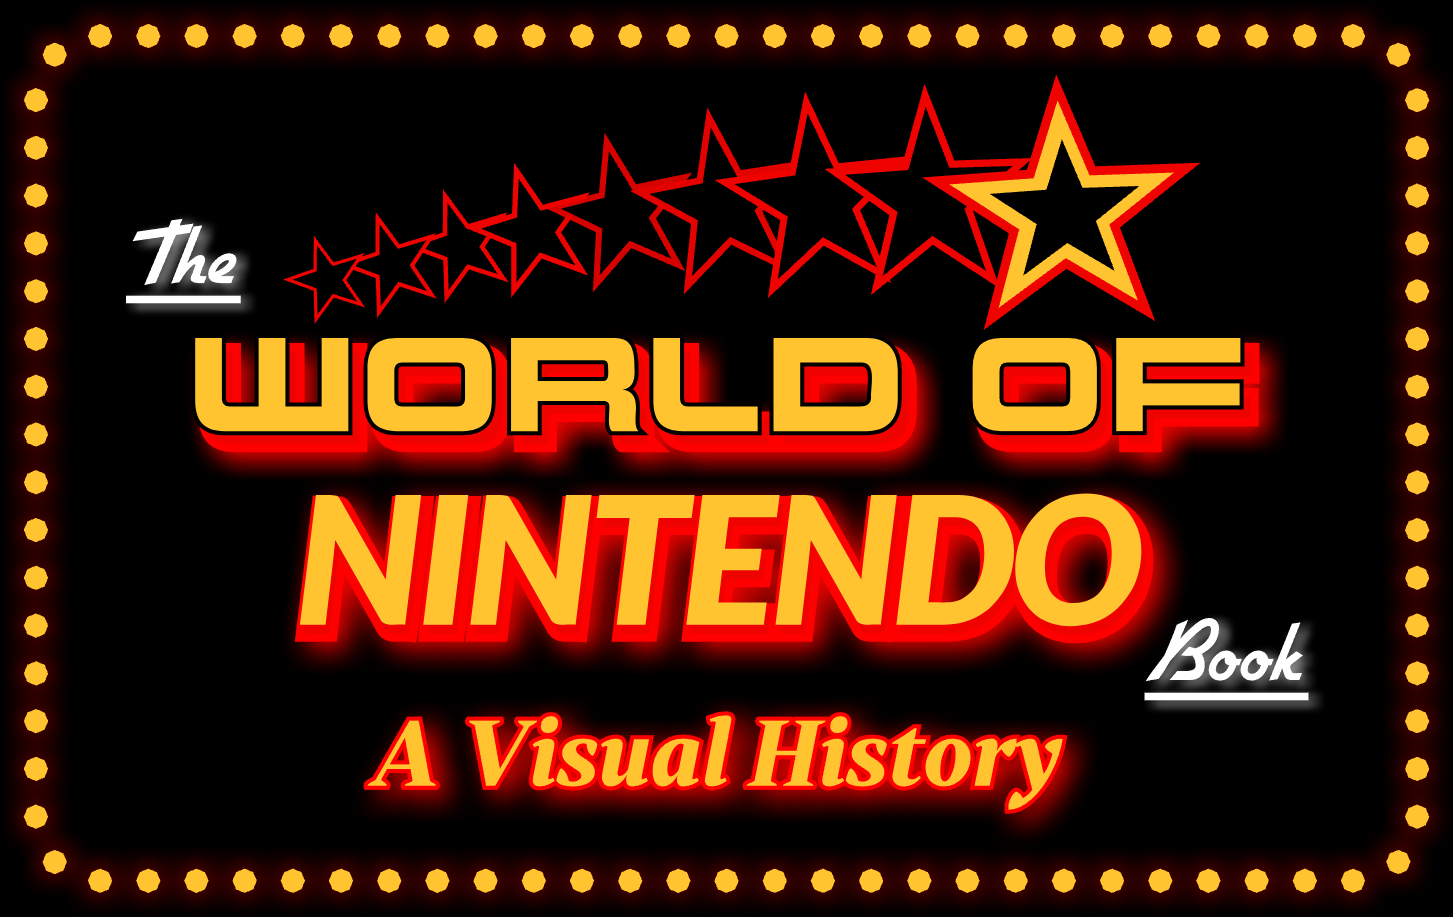 The World of Nintendo Book Volume 1 (Available now!)